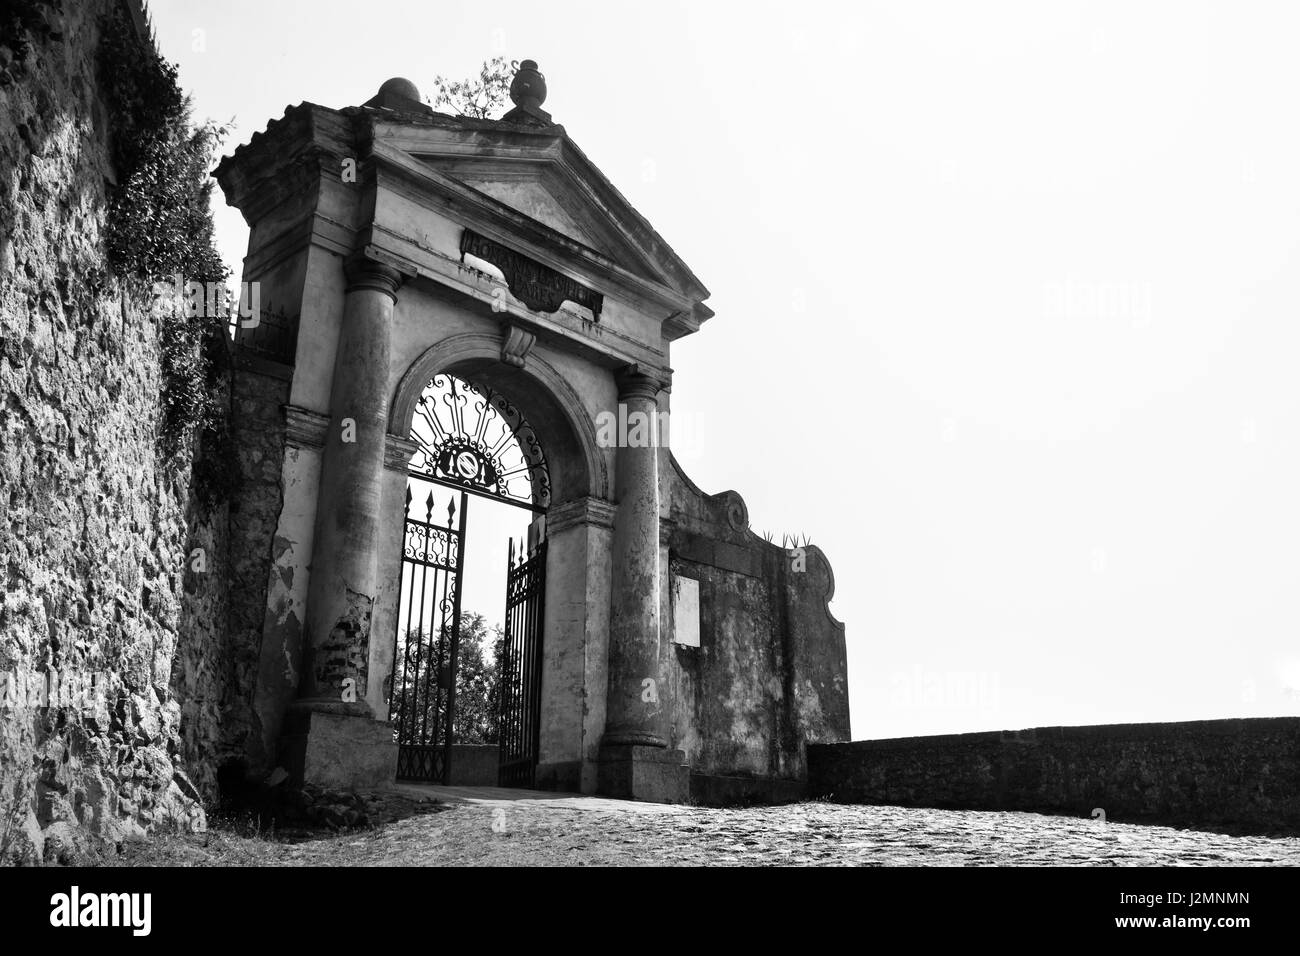 Monselice, Italy, 21 Apr 2017 - black and white picture of an Imposing opened iron gate located in Monselice Stock Photo